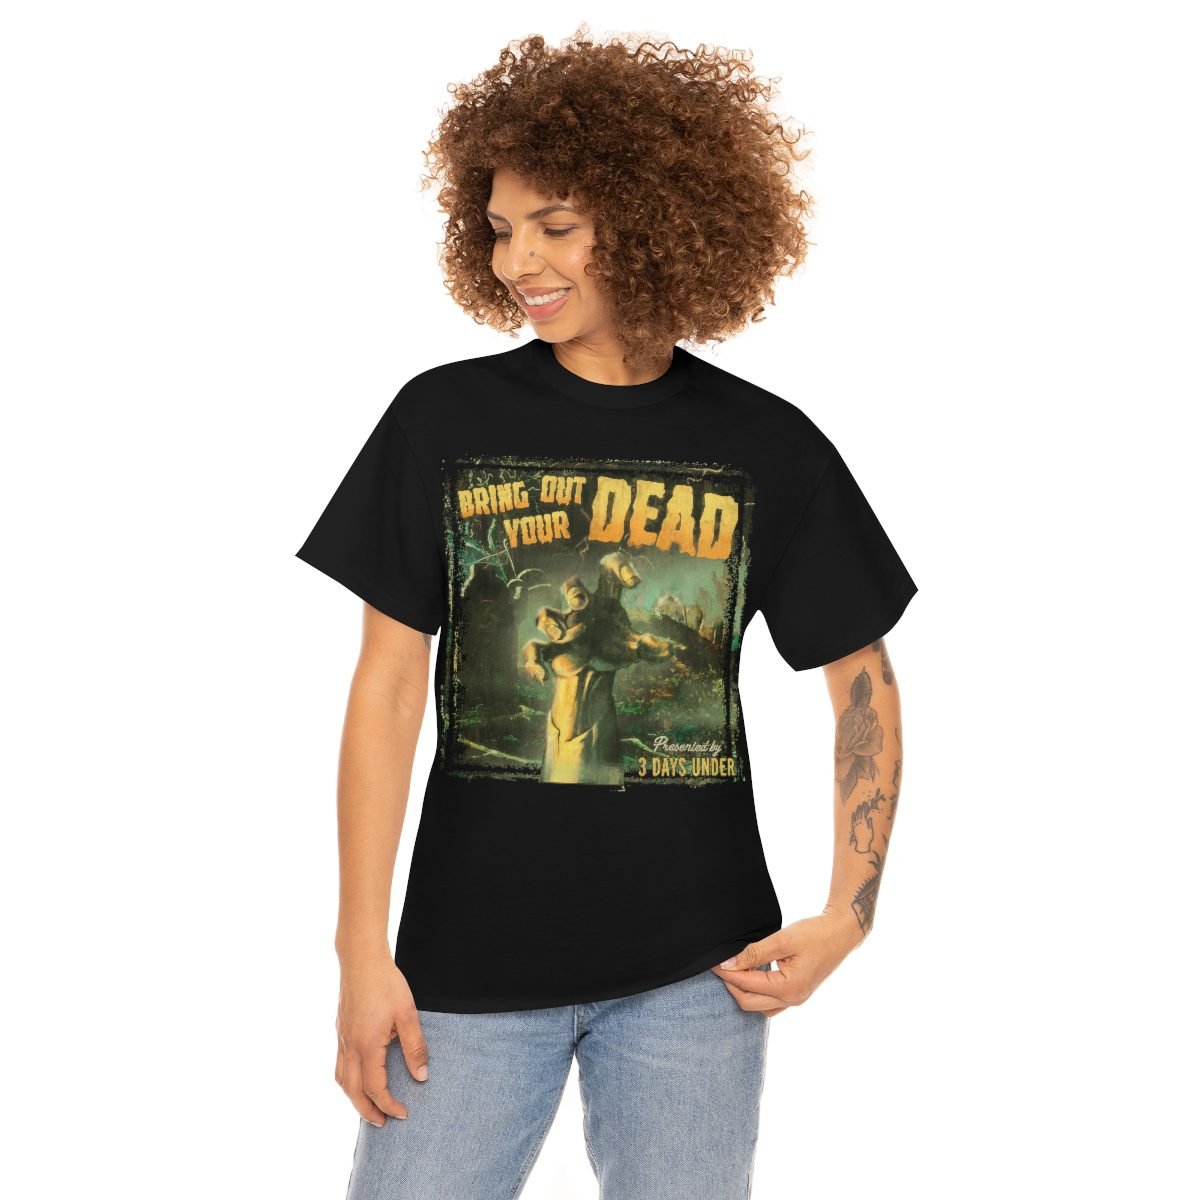 3 Days Under – Bring Out Your Dead Short Sleeve Tshirt (5000)